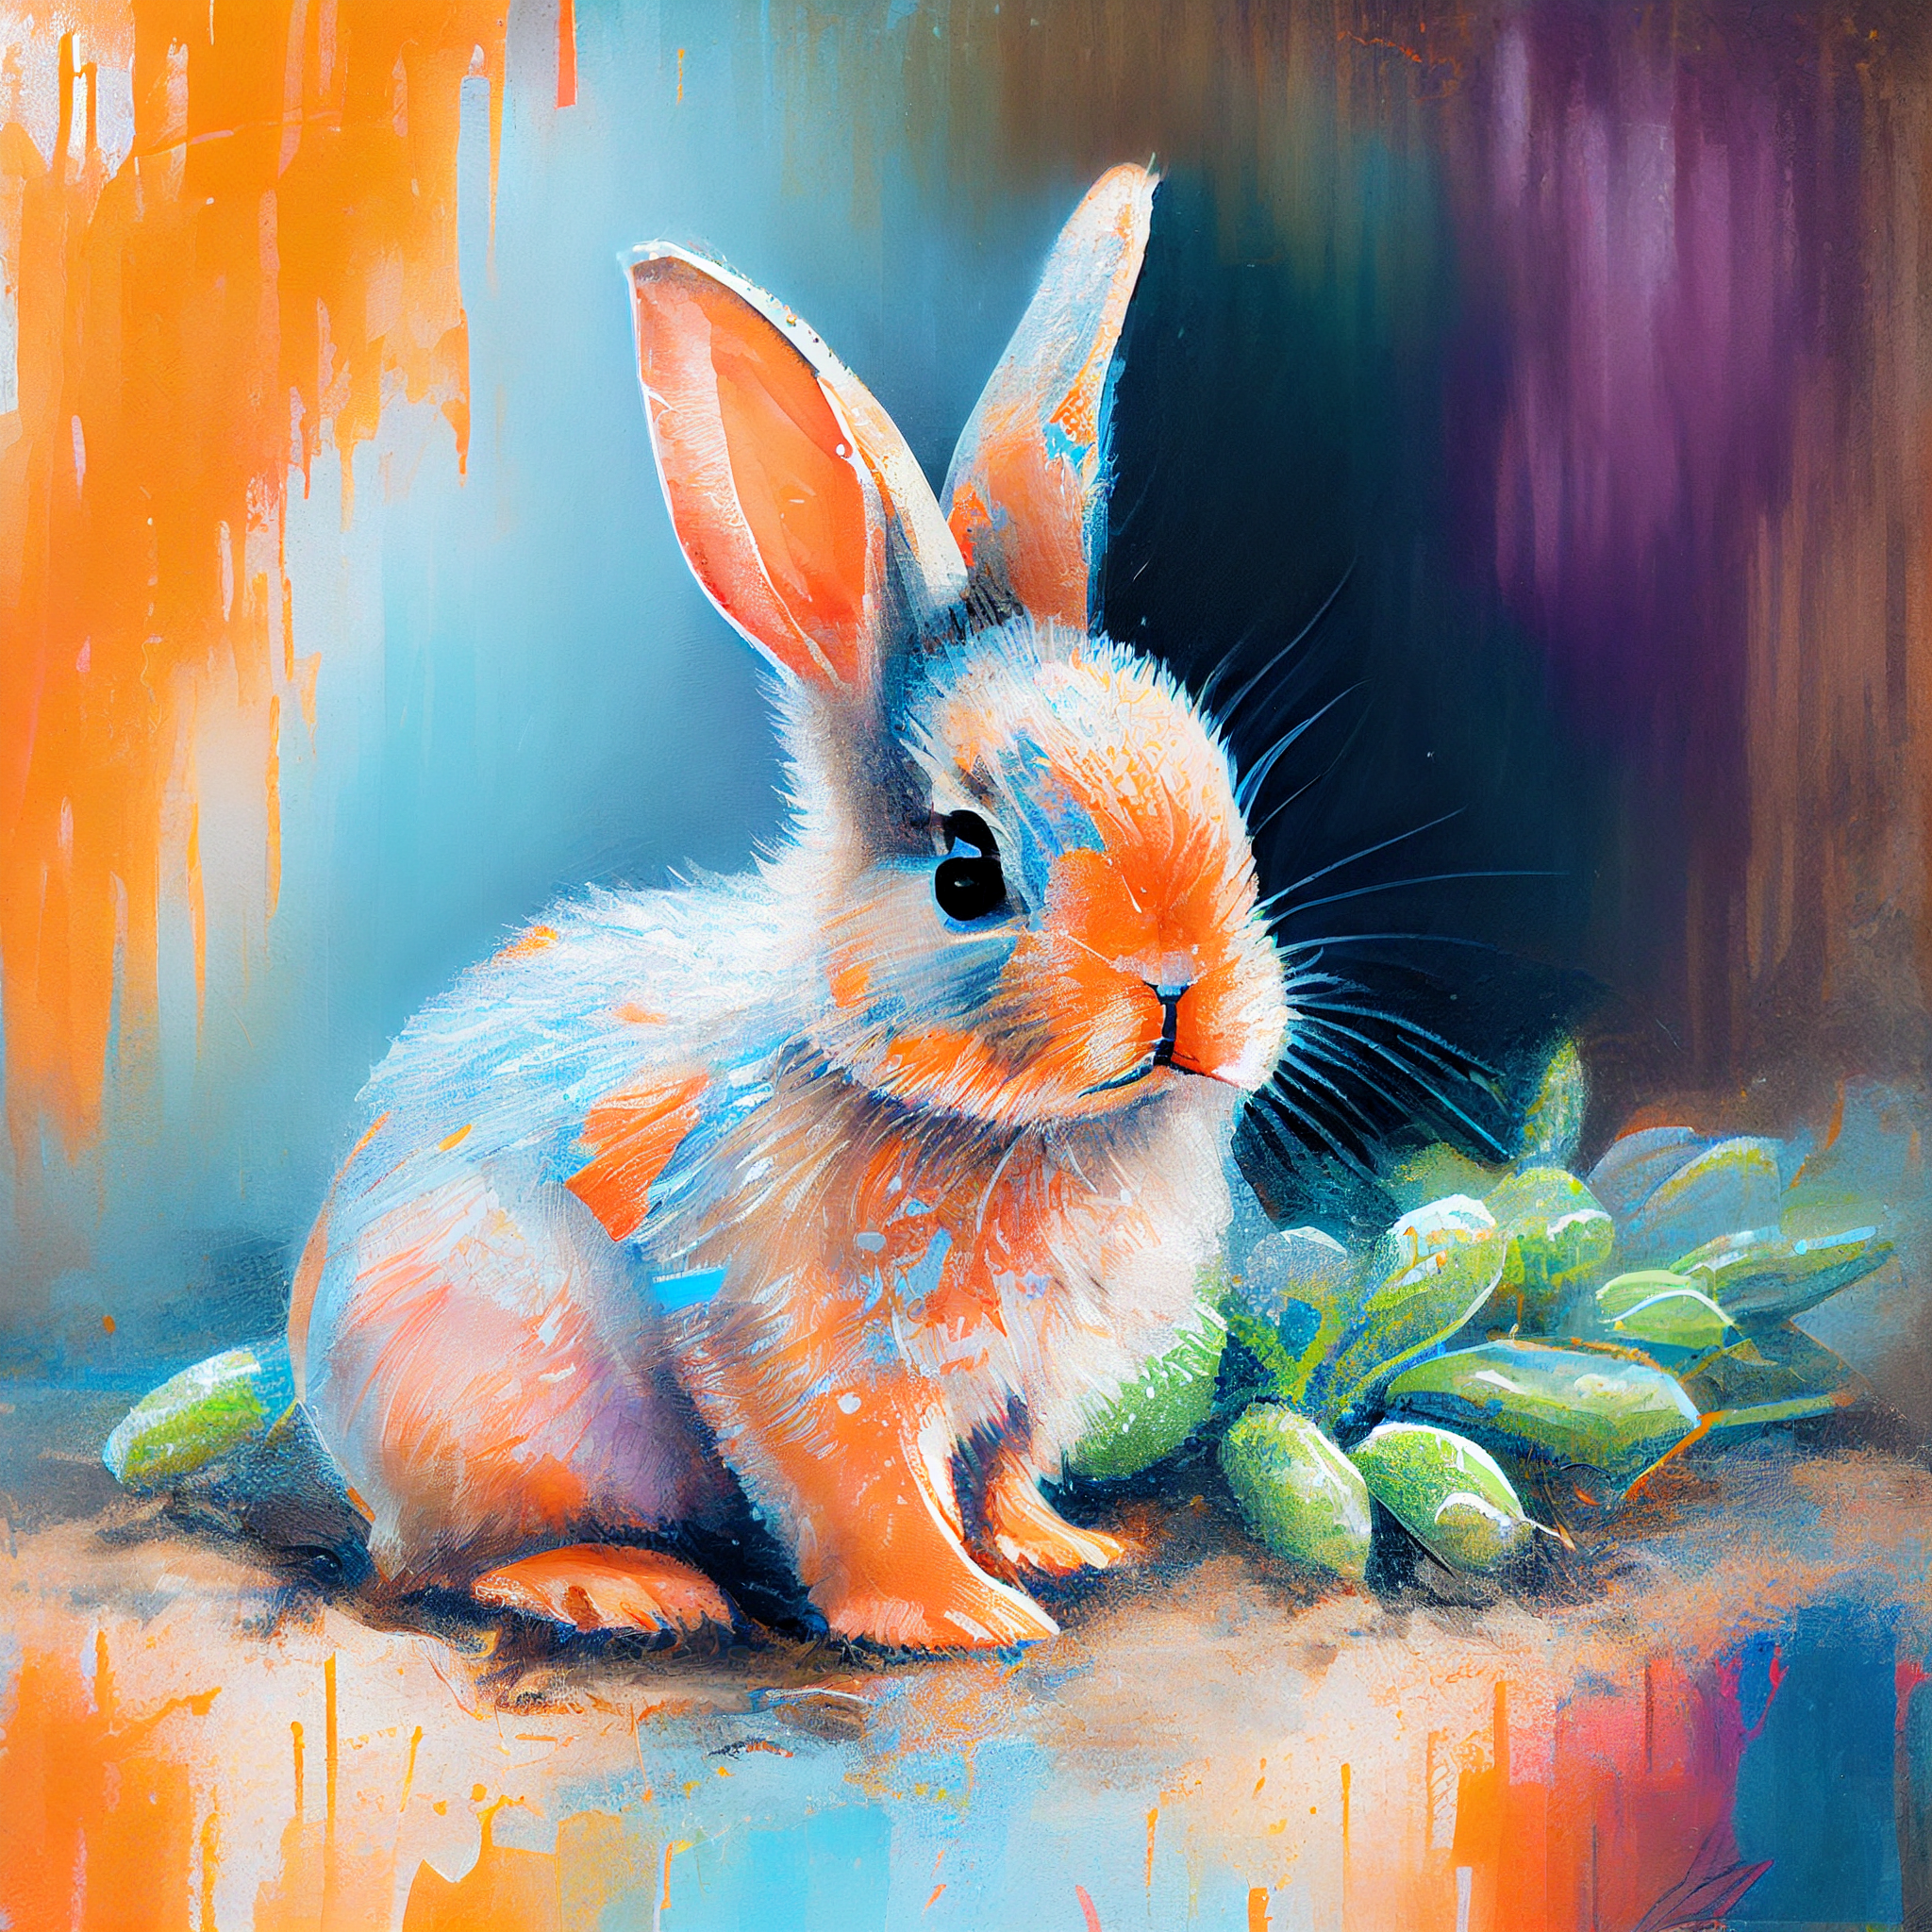 Whimsical Baby Rabbit Holding a Carrot: Vibrant Acrylic Abstract Art